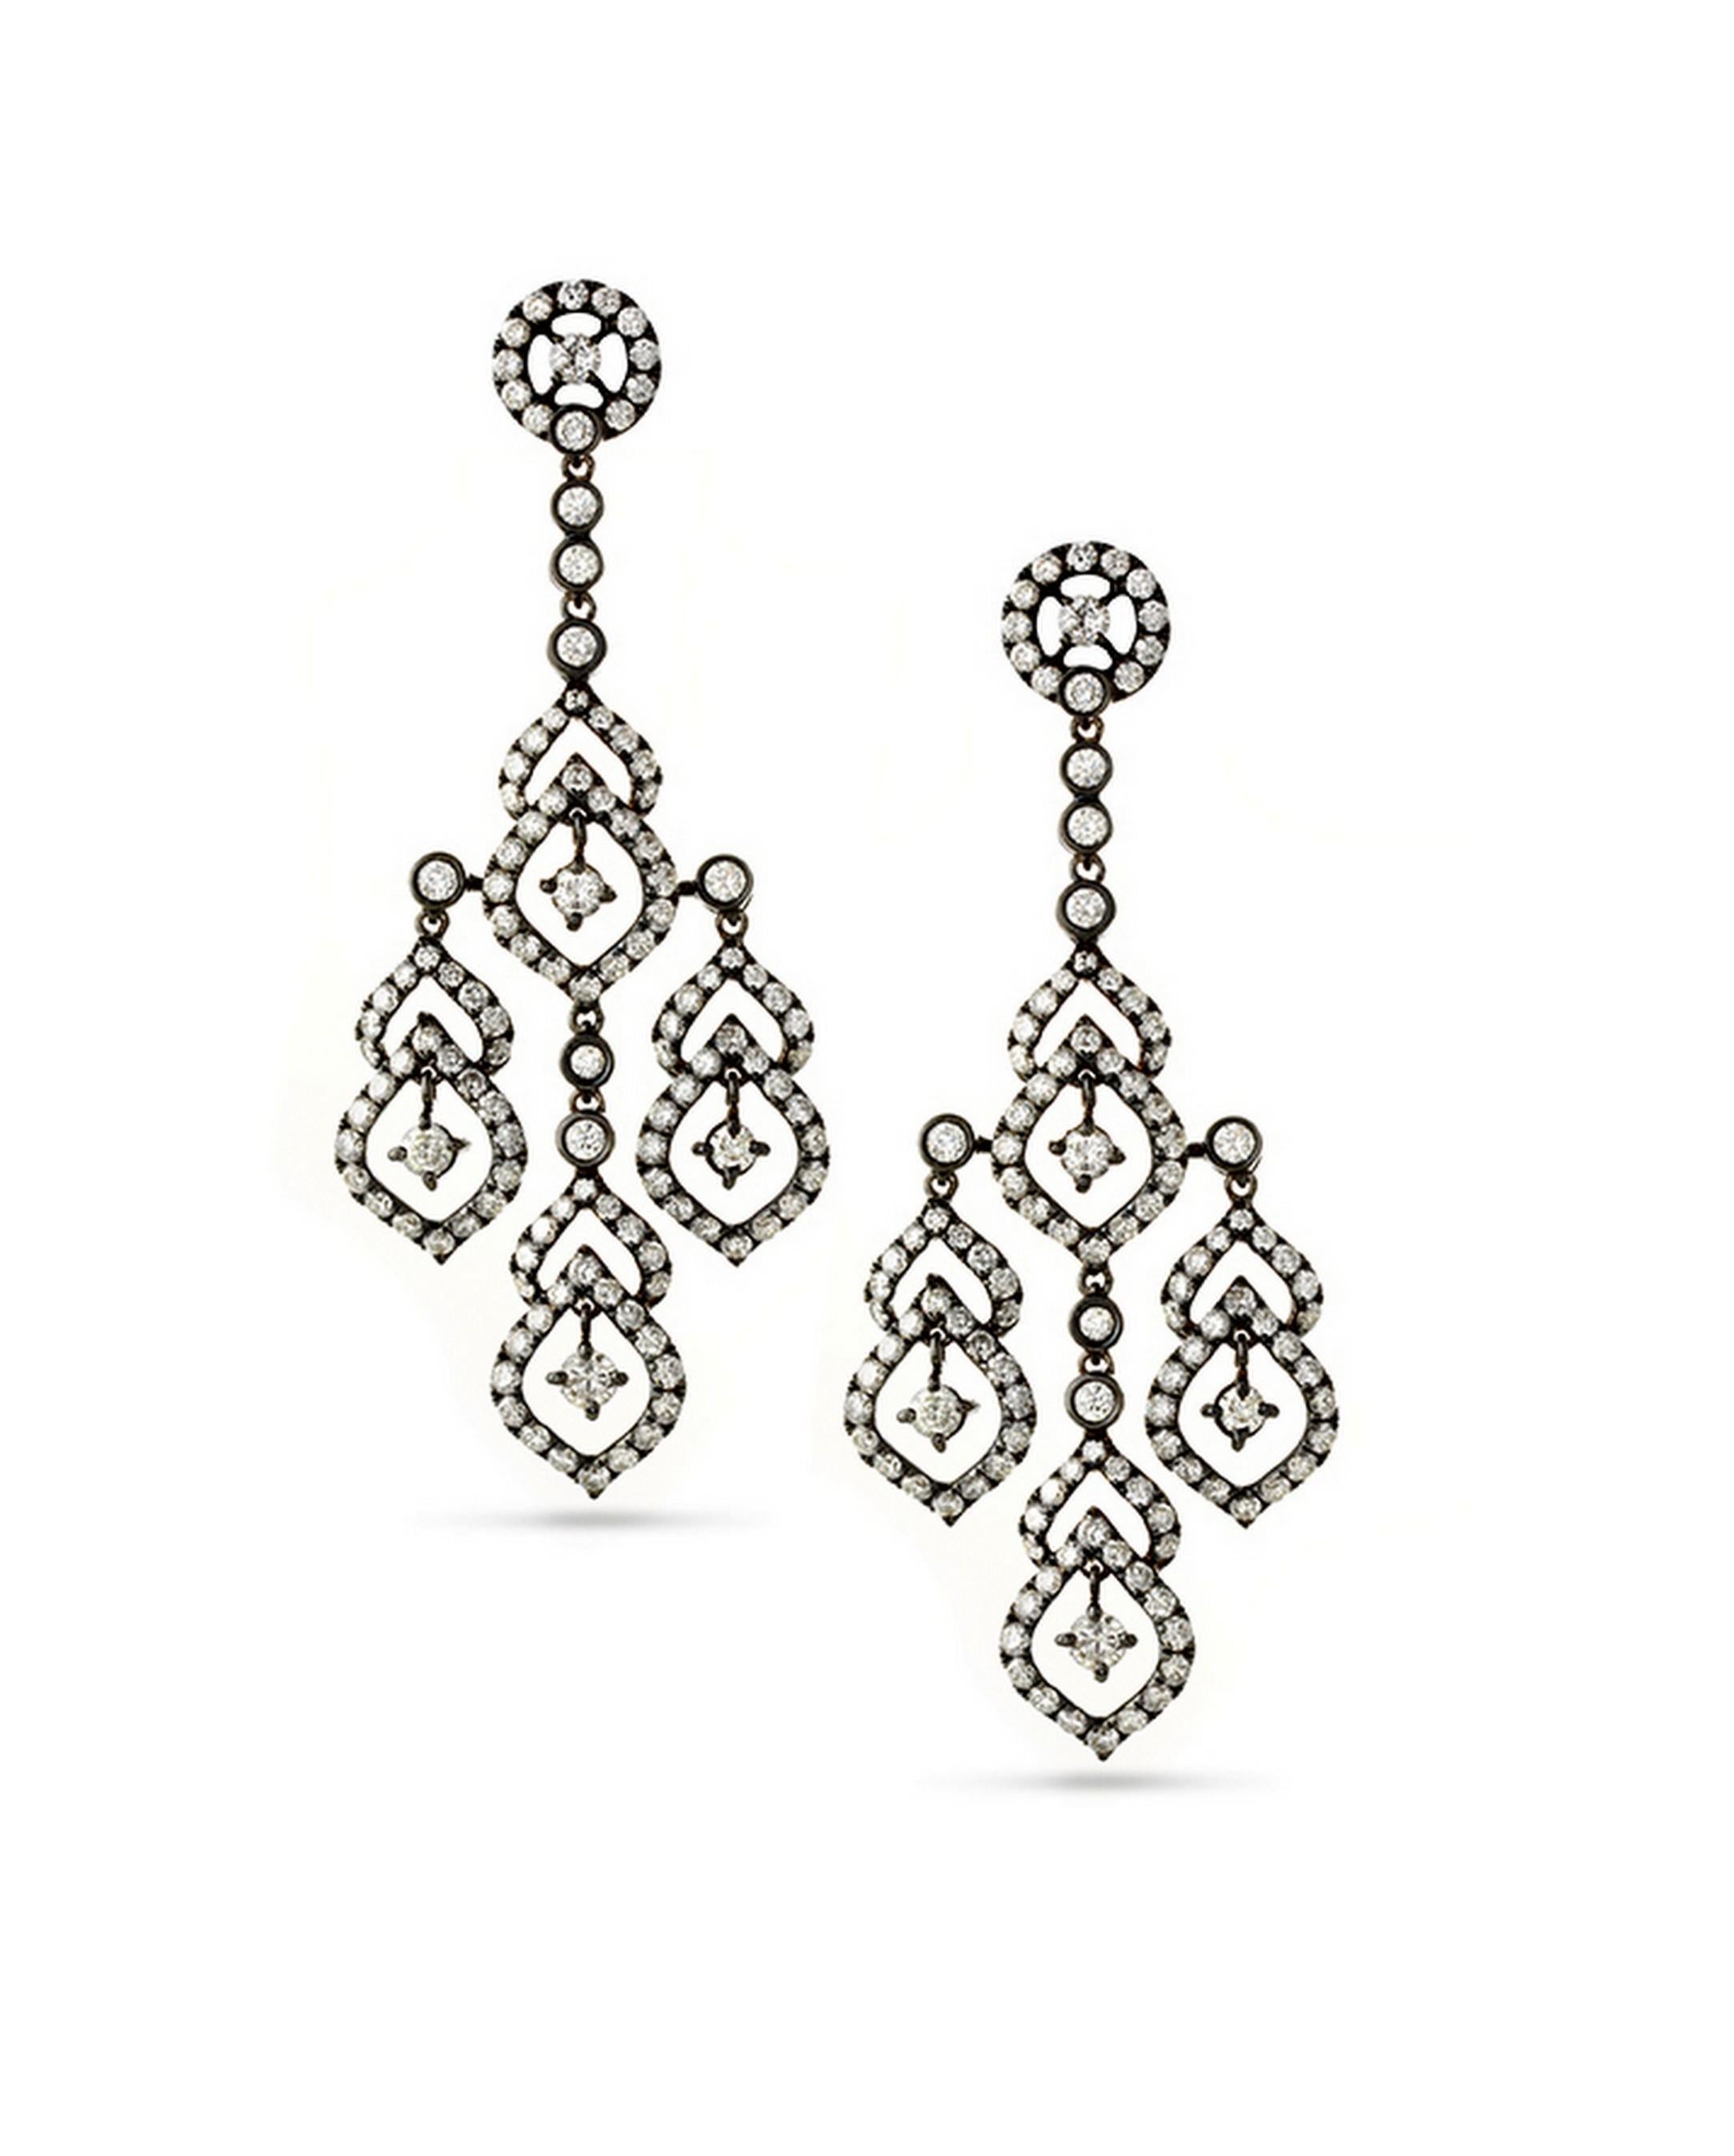 Whether your “go to” Elegance is Grace Kelly or Beyoncé - these Elegant Diamond Earrings will dance all night with you!!! Visions of a timeless classic with modern sensualities await your evenings…

6.52Cts Round Brilliant Diamonds
18Kt White gold